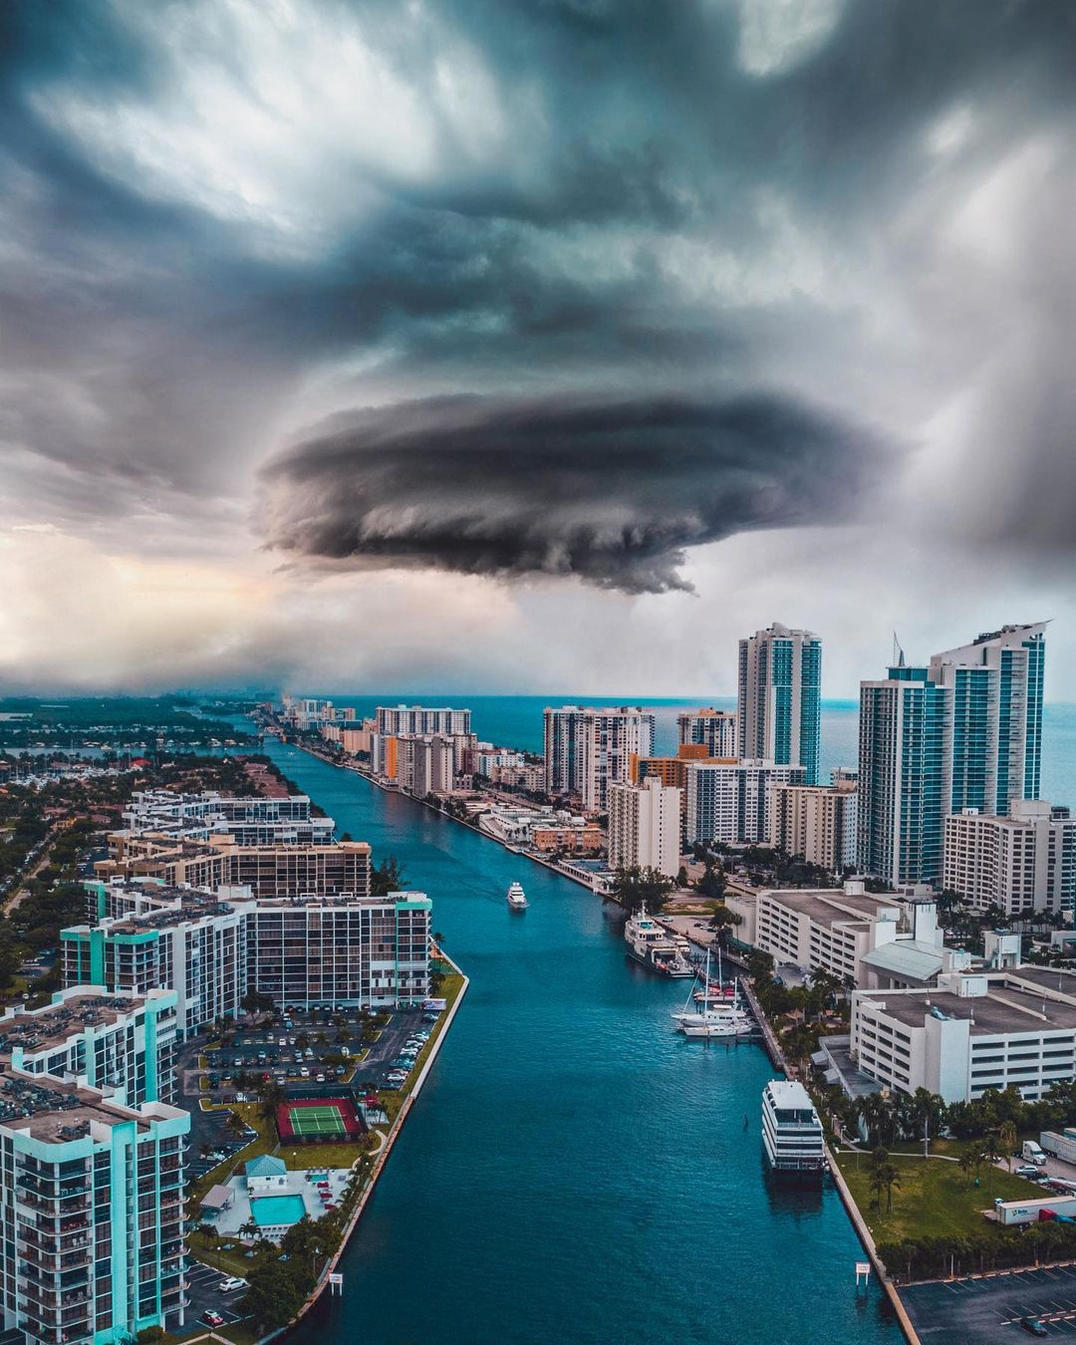 image  1 Miami | Travel community - A cloudy day